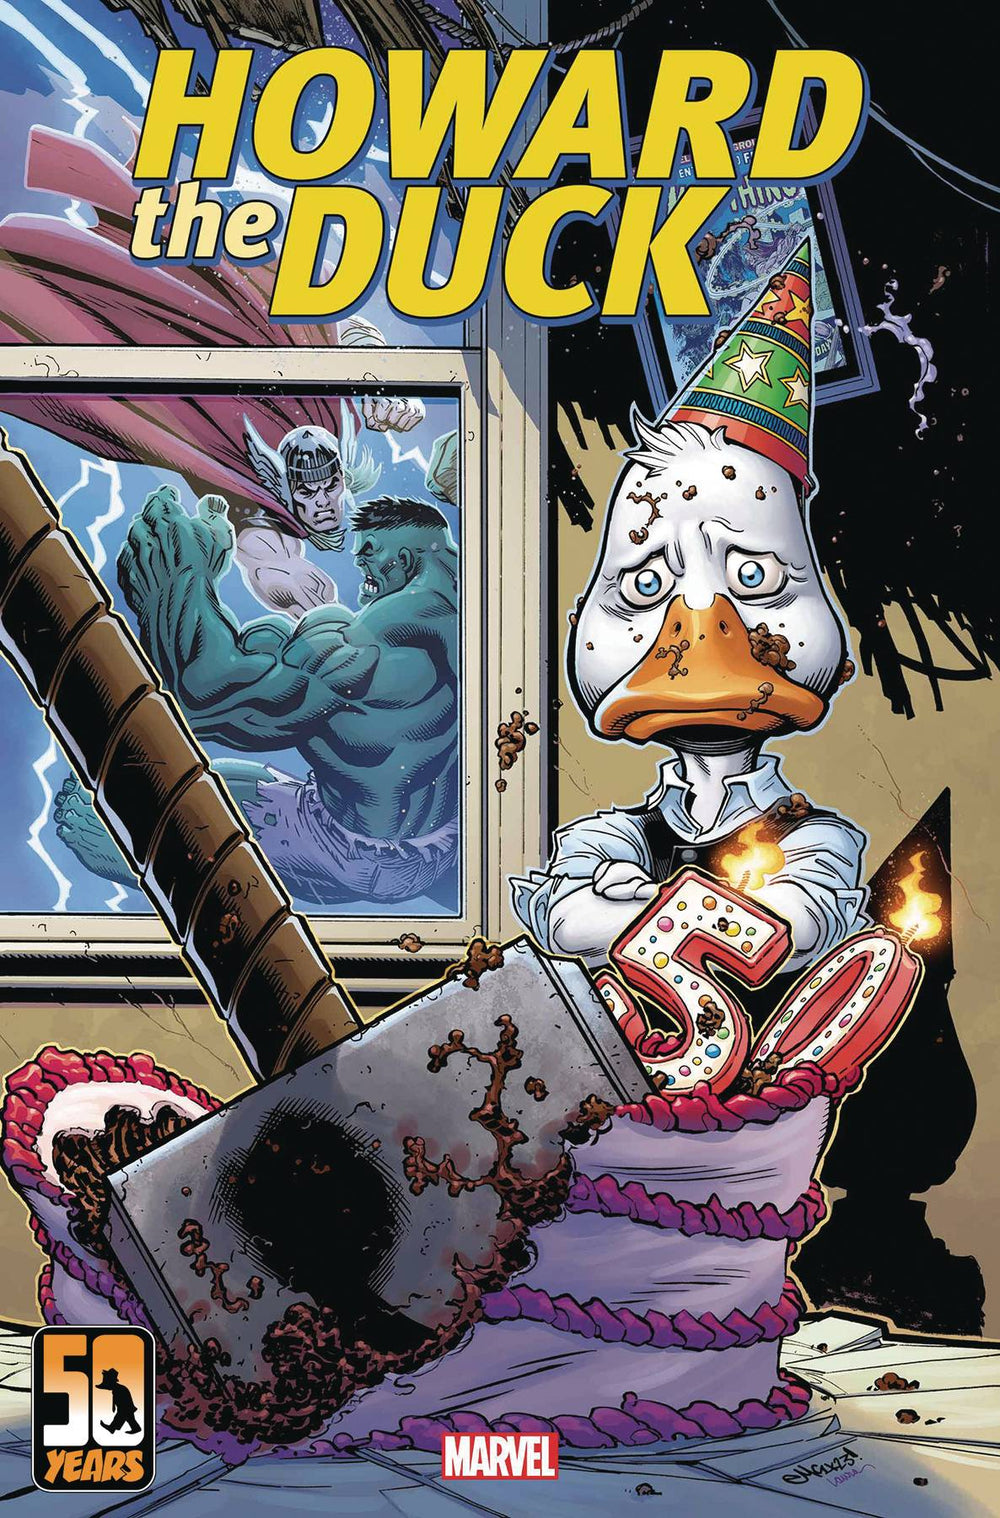 Howard the Duck 1 Cover A CGC 9.8 Presale